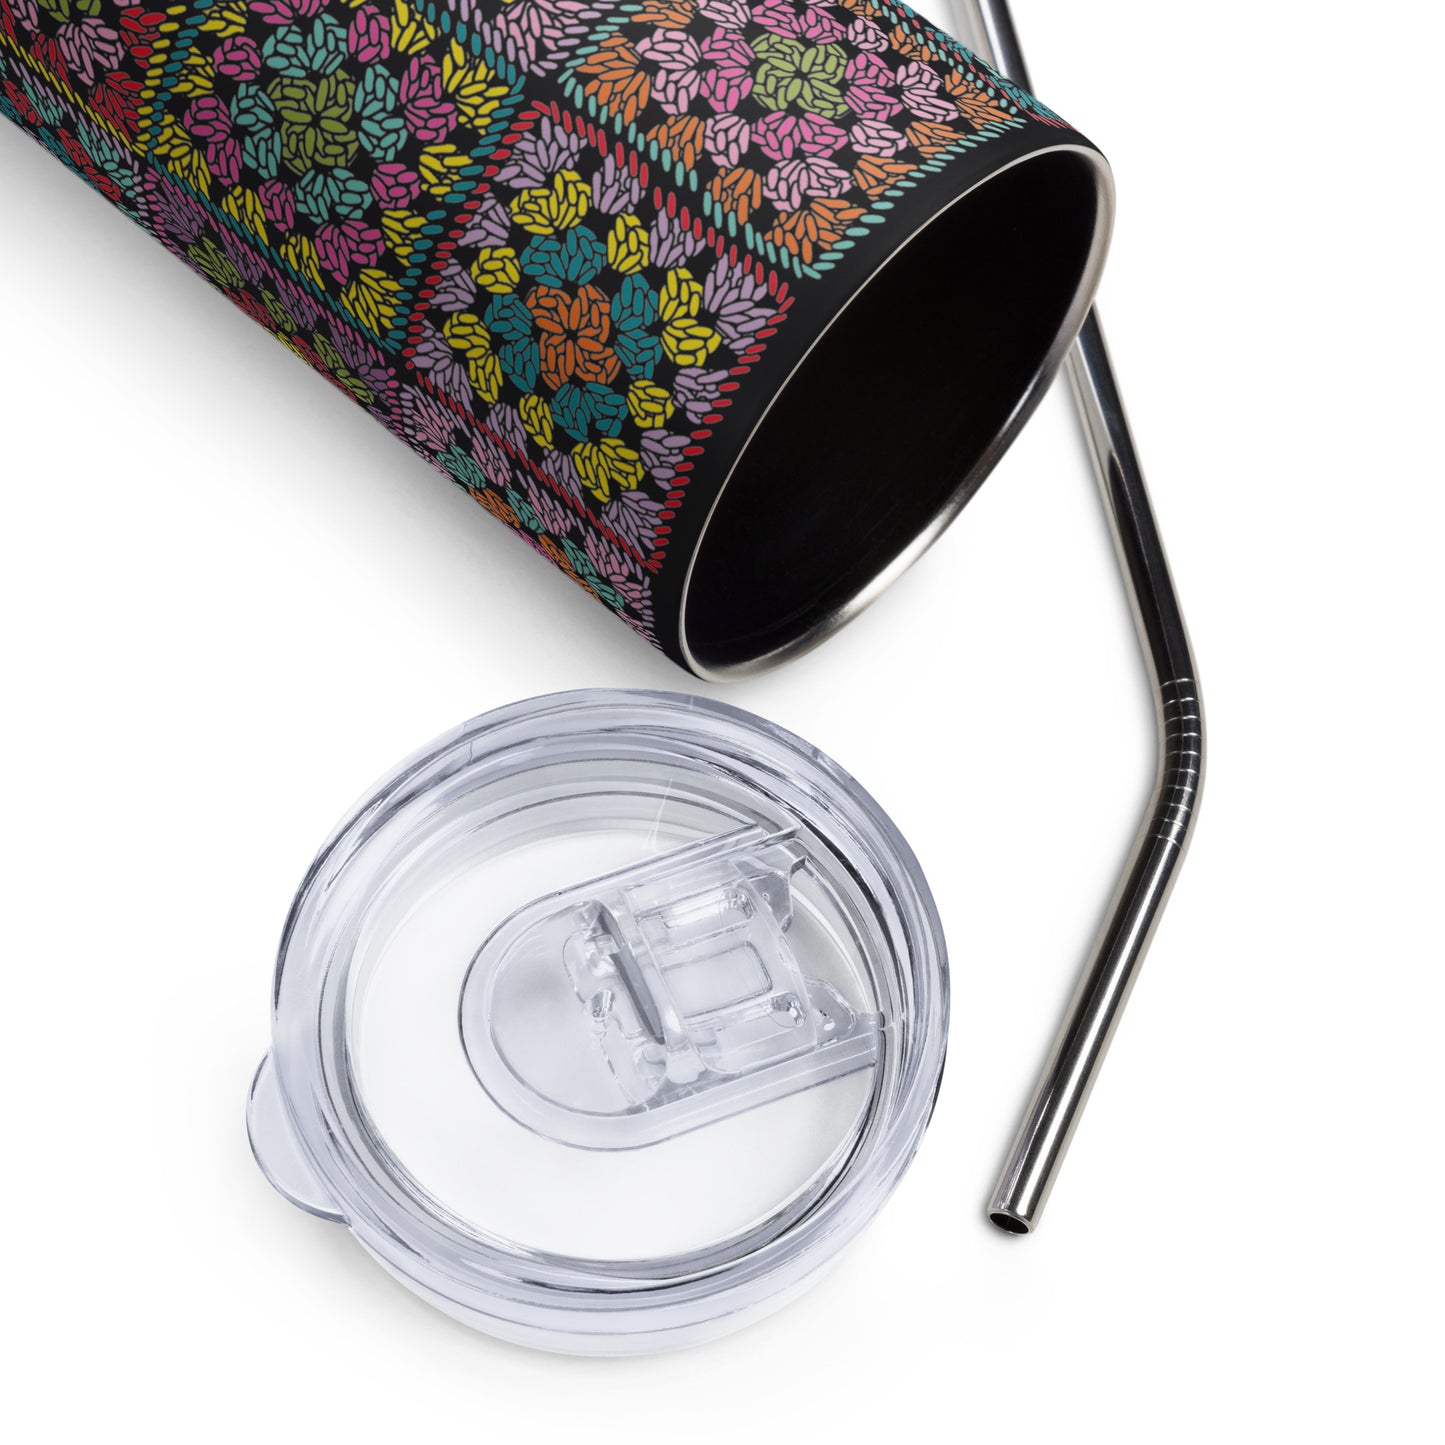 Granny Square Stainless steel tumbler